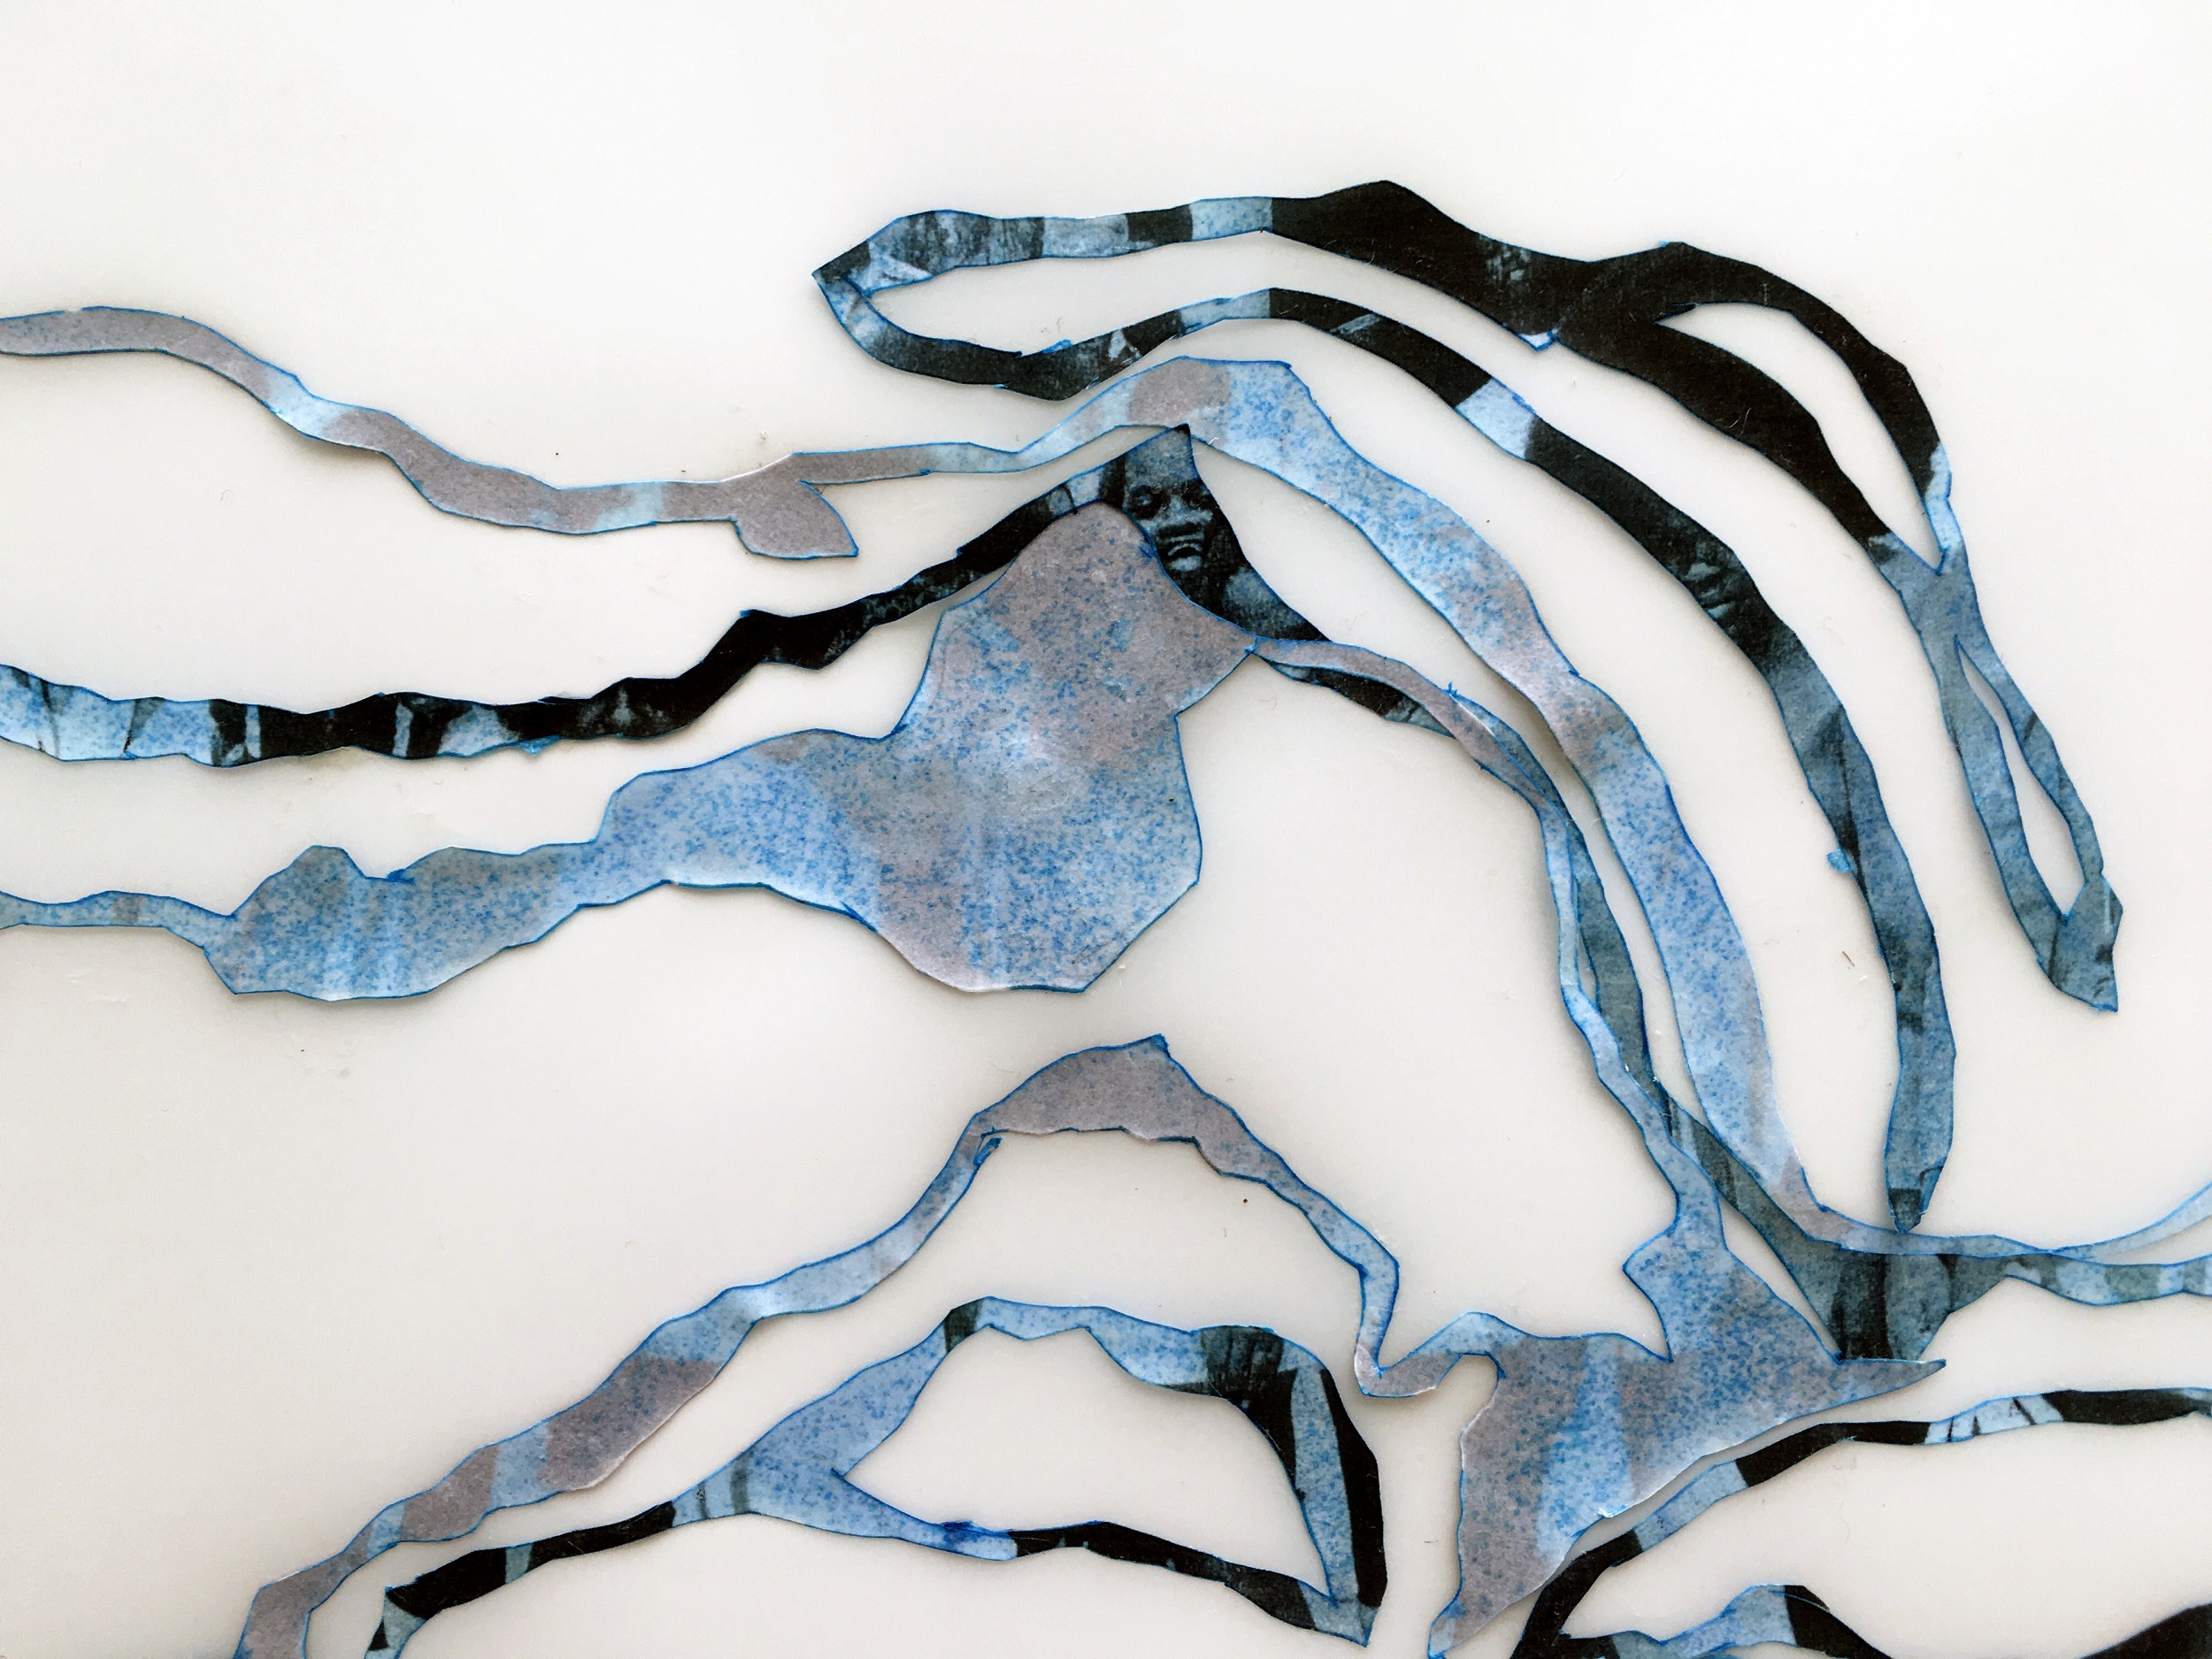 Detail of abstract seaweed-like cutout forms in black, white, and silver against a white background